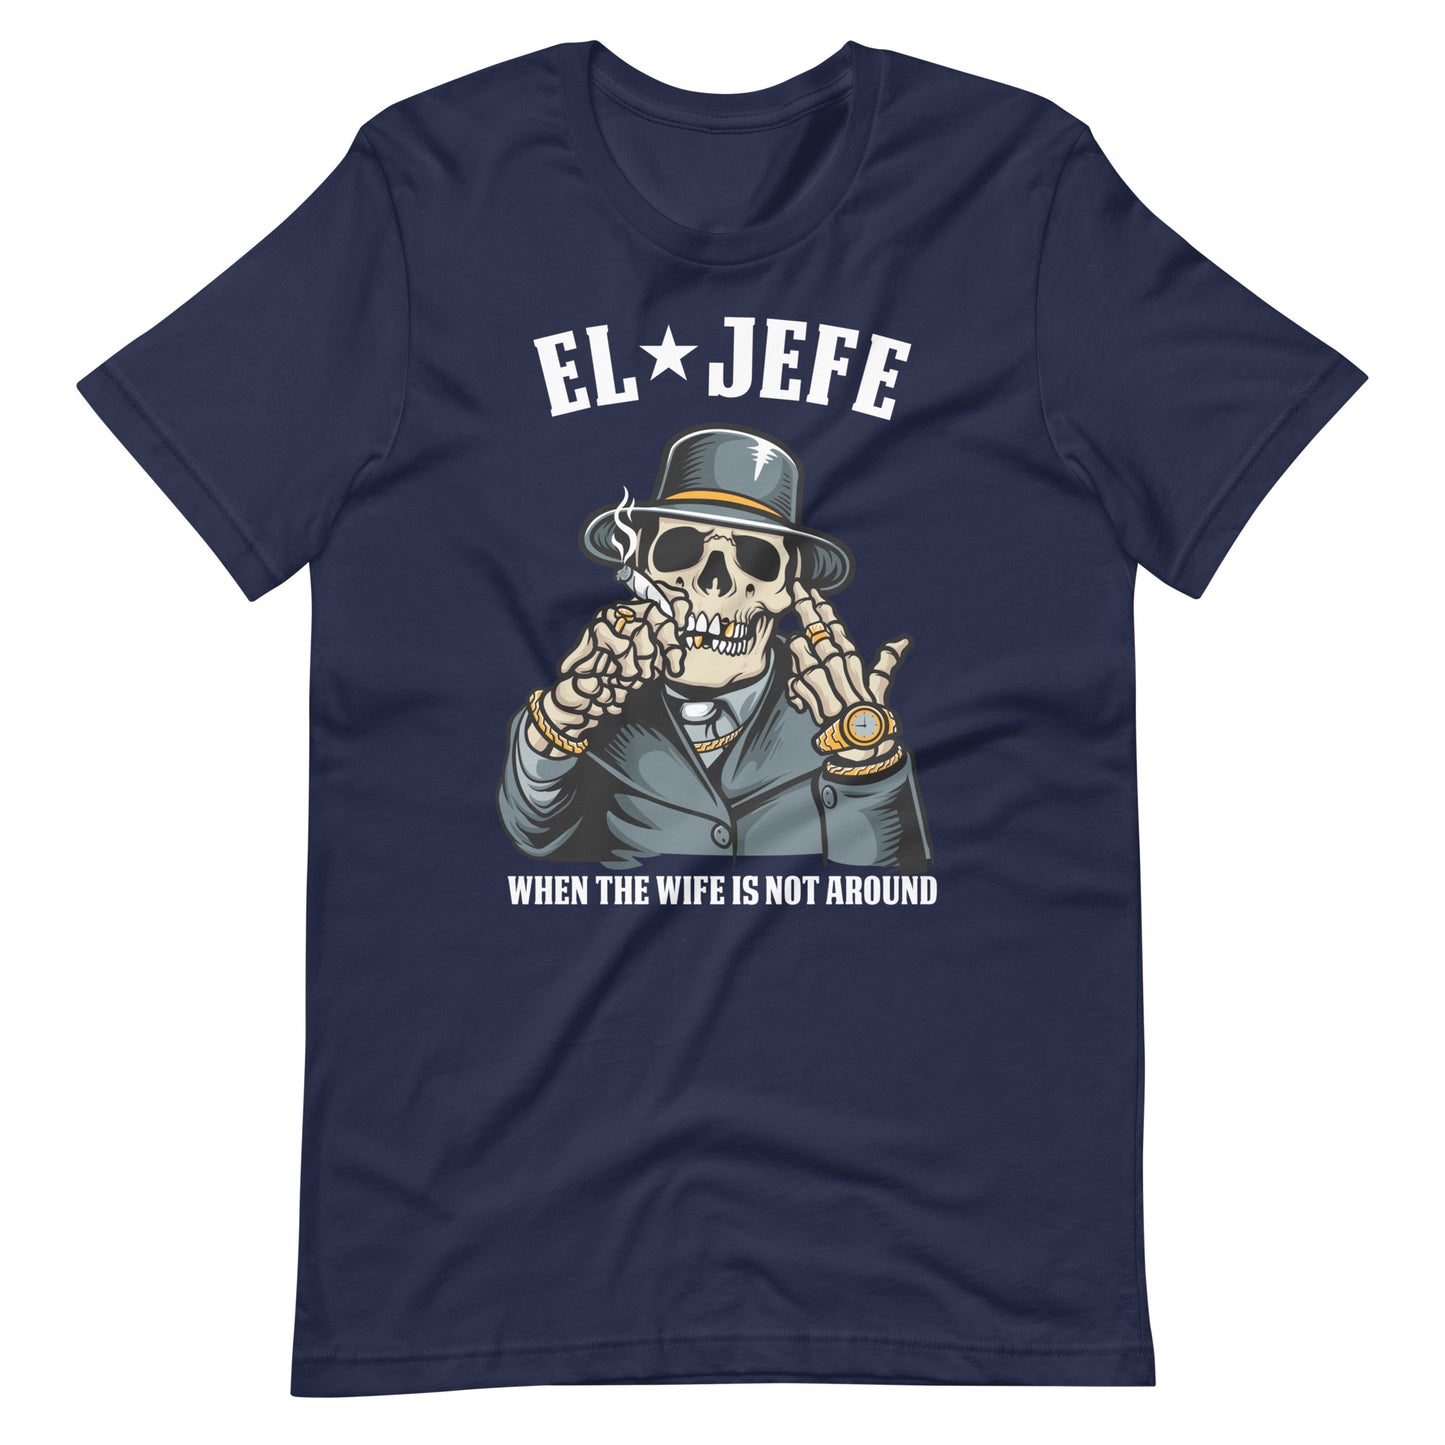 El Jefe When the Wife is Not Around T-Shirt